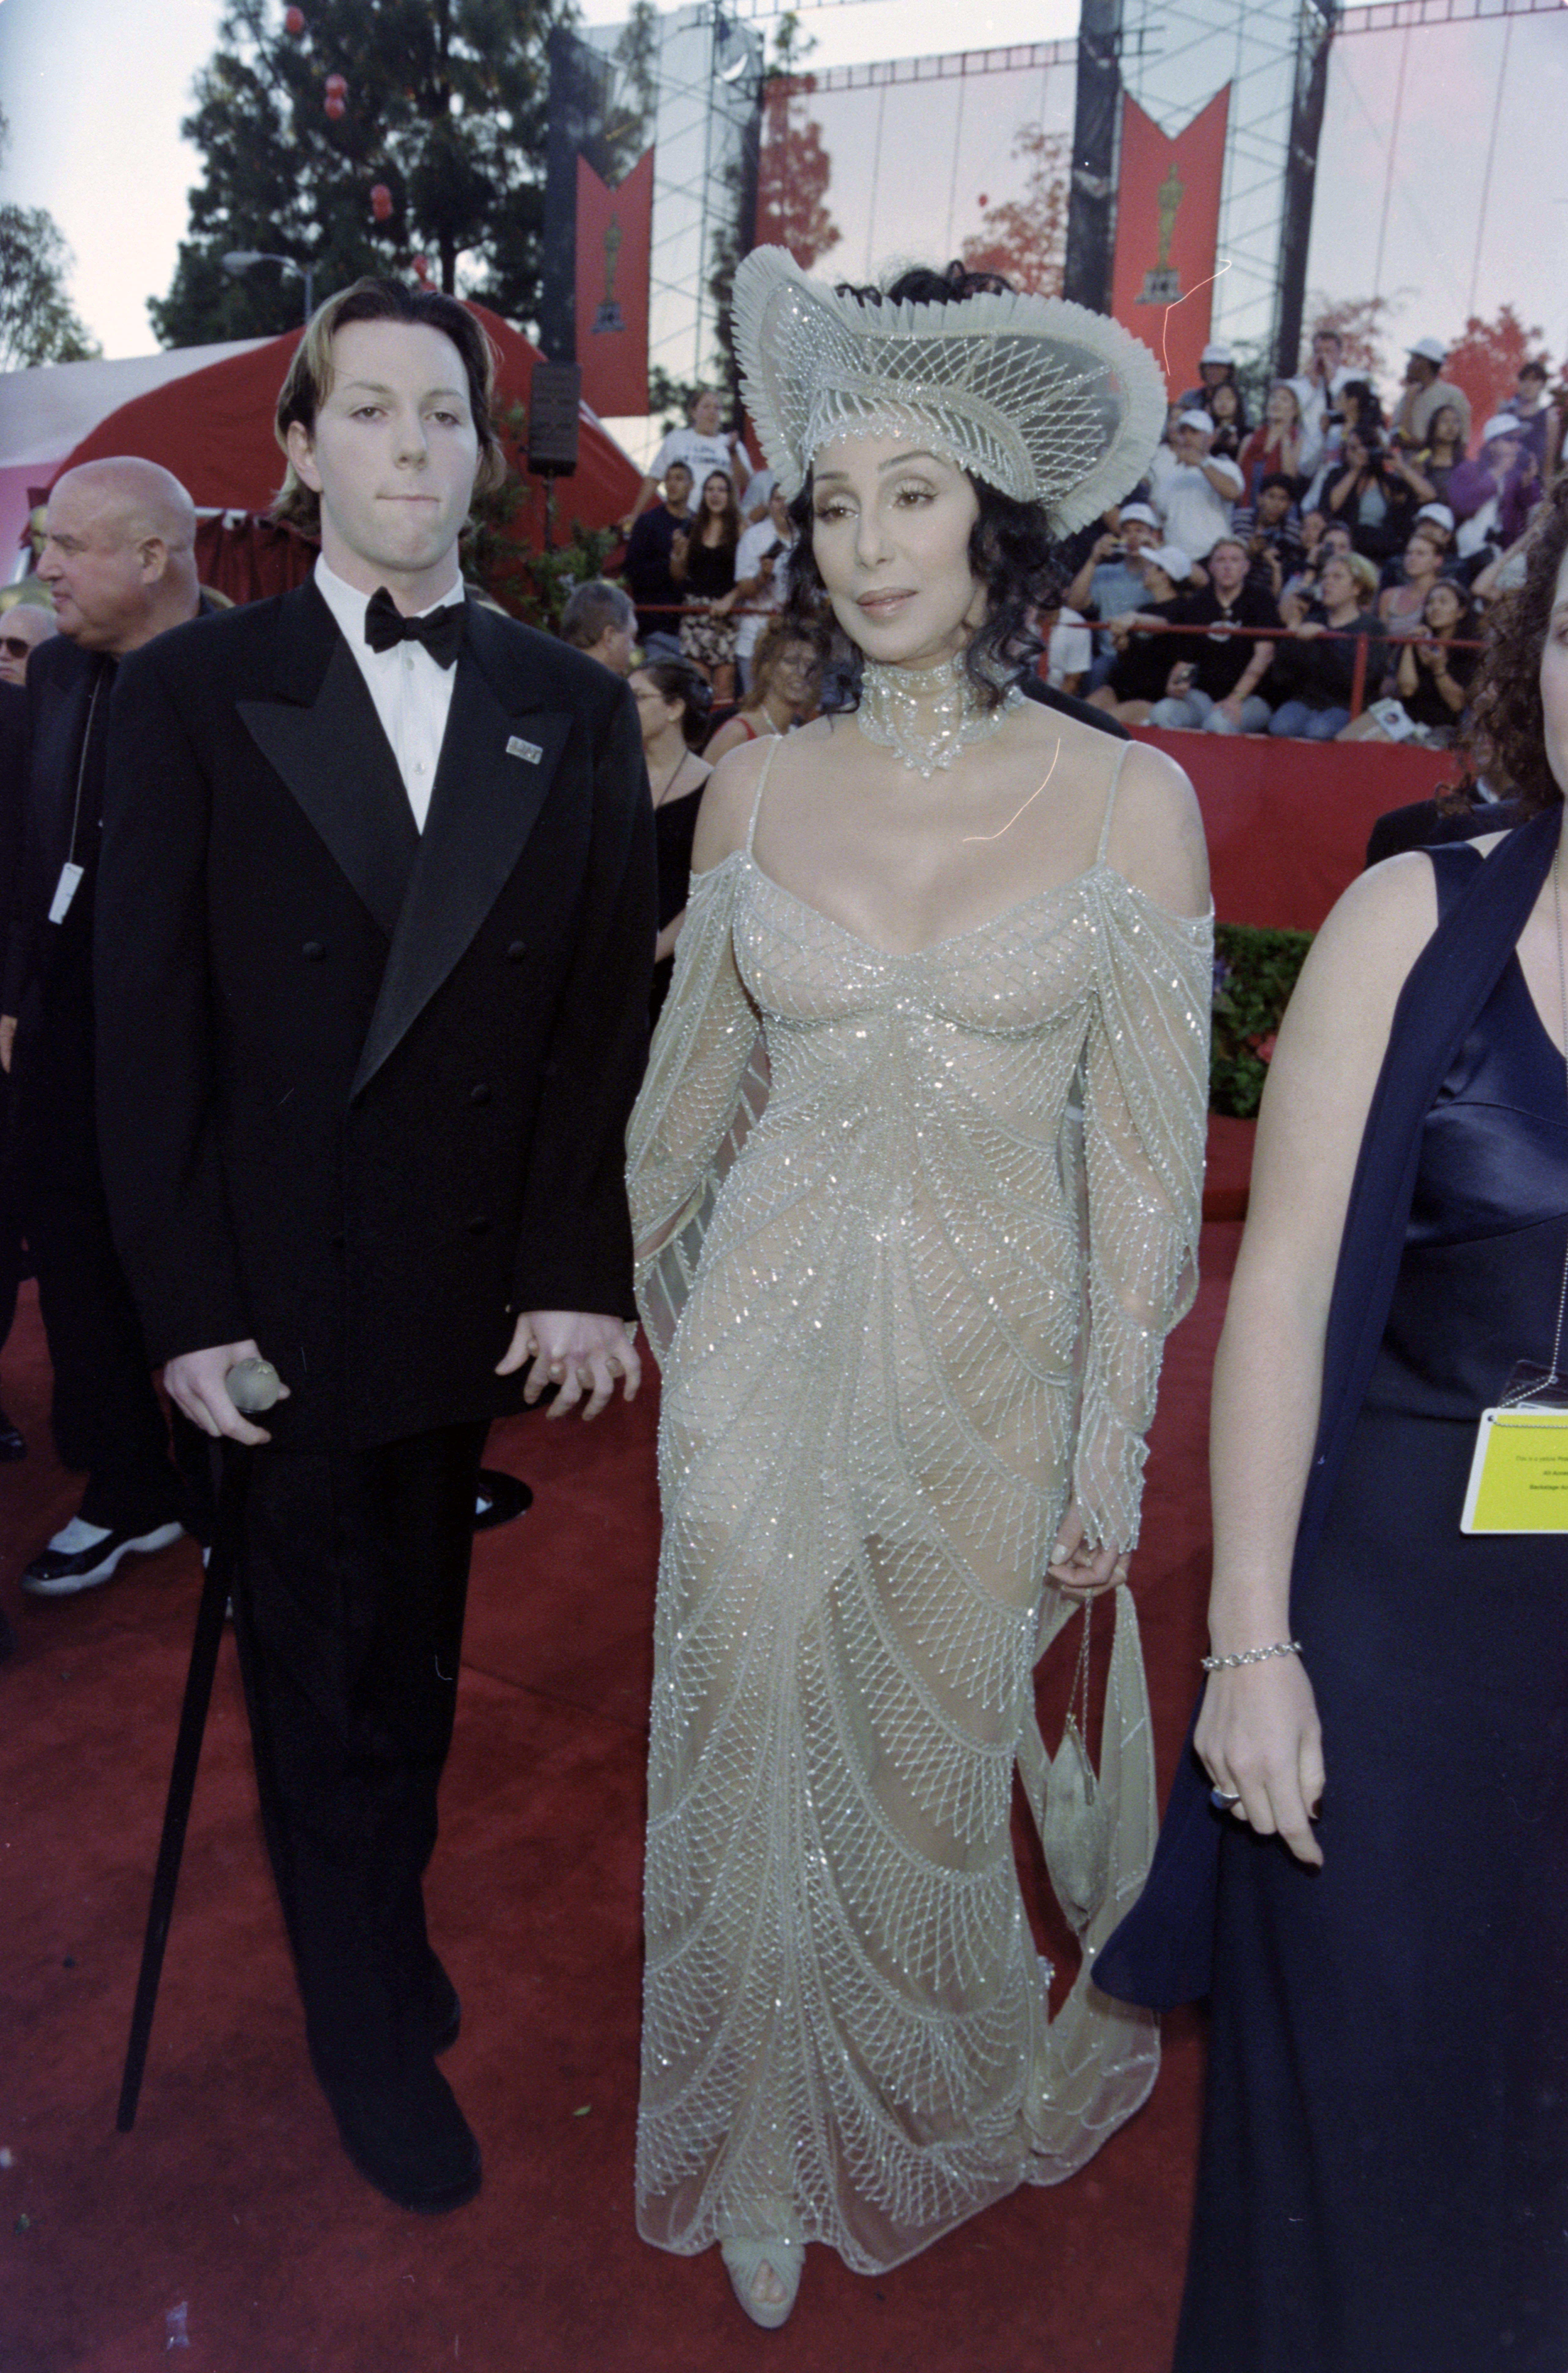 Elijah Blue Allman and Cher, attend the 70th Academy Awards at the Shrine Auditorium in Los Angeles, California, on March 23, 1998. | Source: Getty Images